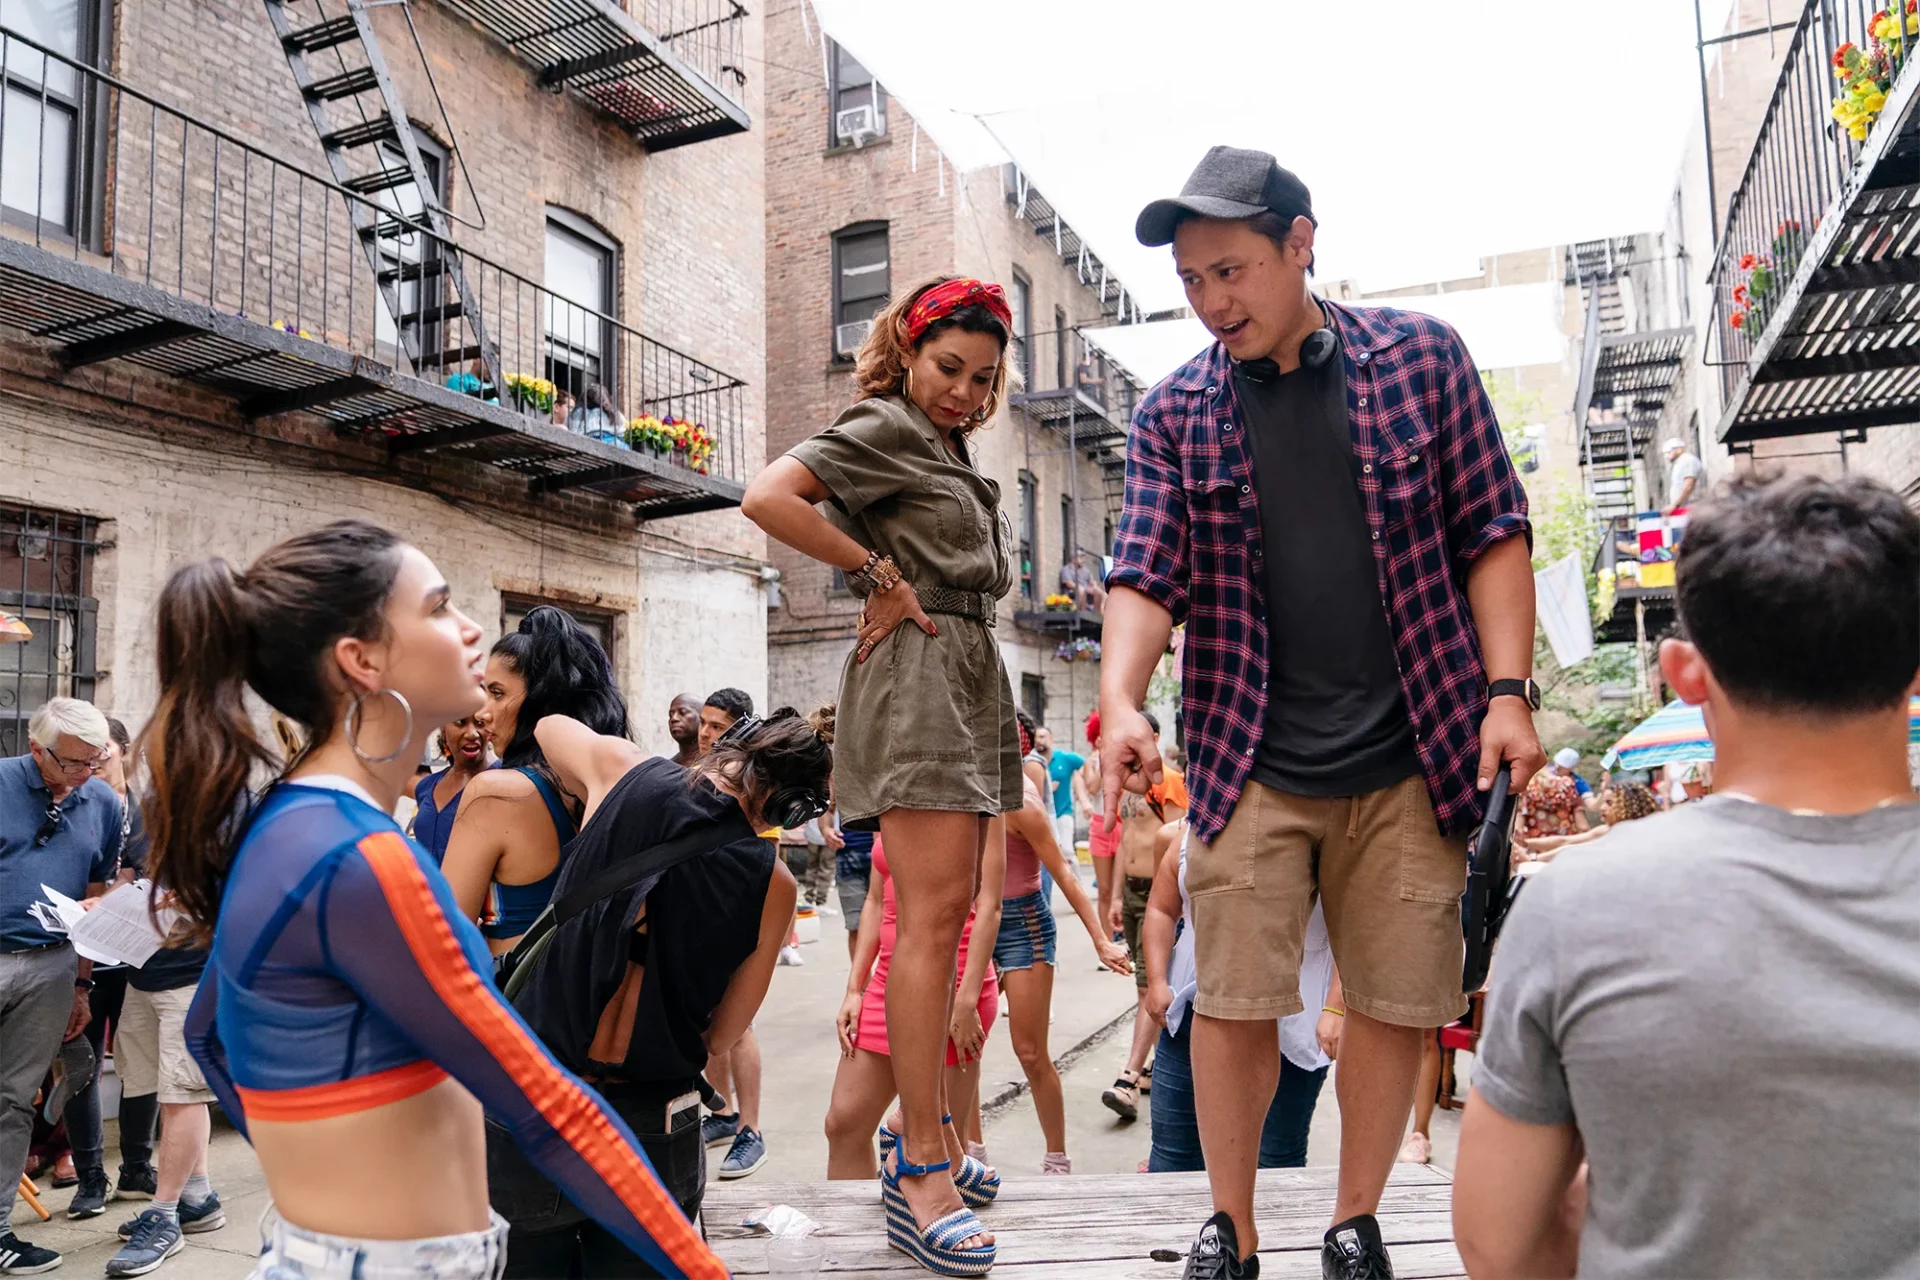 Best movies on HBO max: In The Heights (2021) 